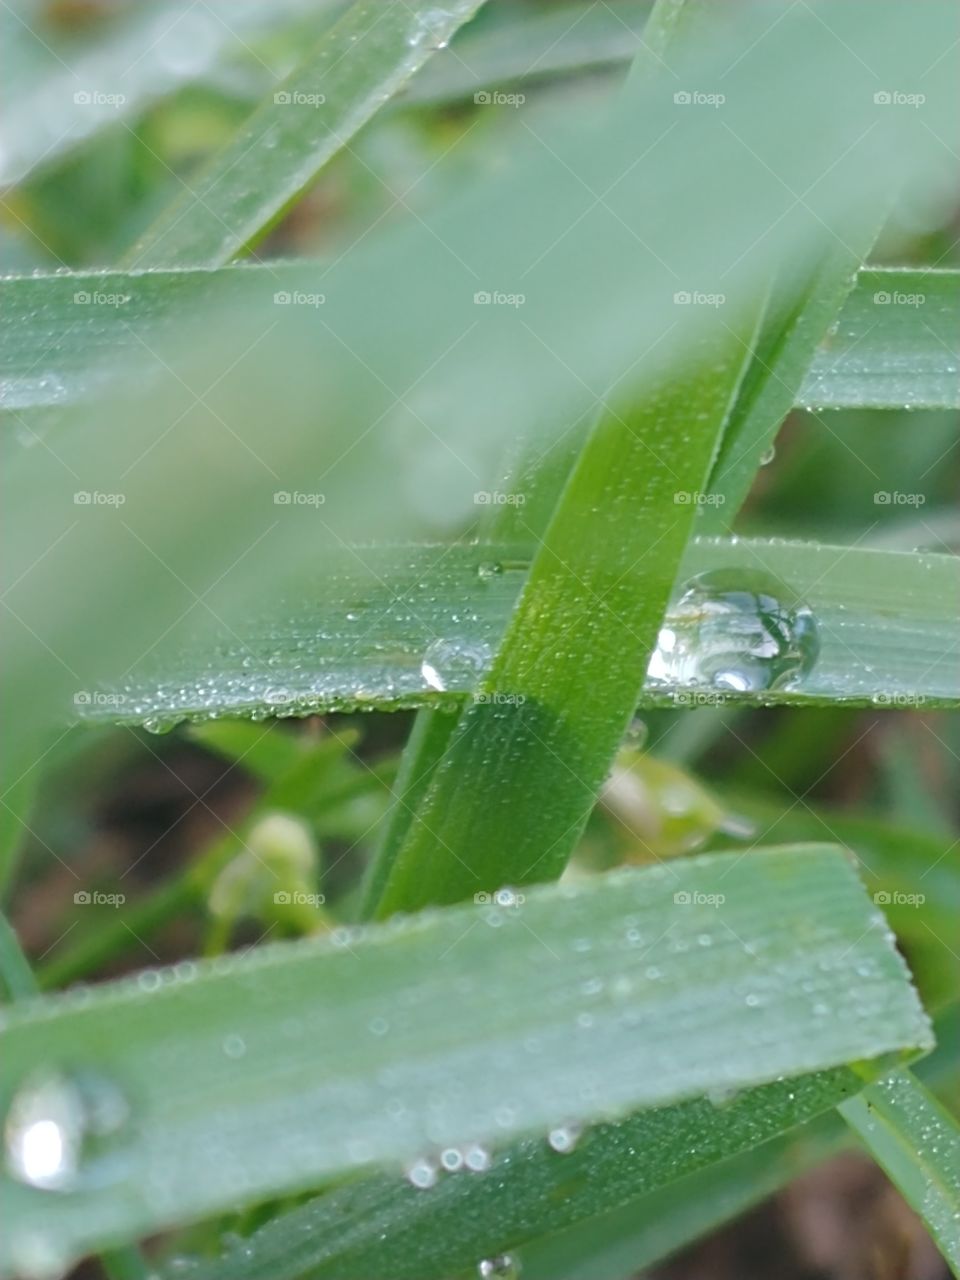 Close-up of clear, reflective raindrop resting on a blade of grass behind other blades with some blurred blades crossing in front.